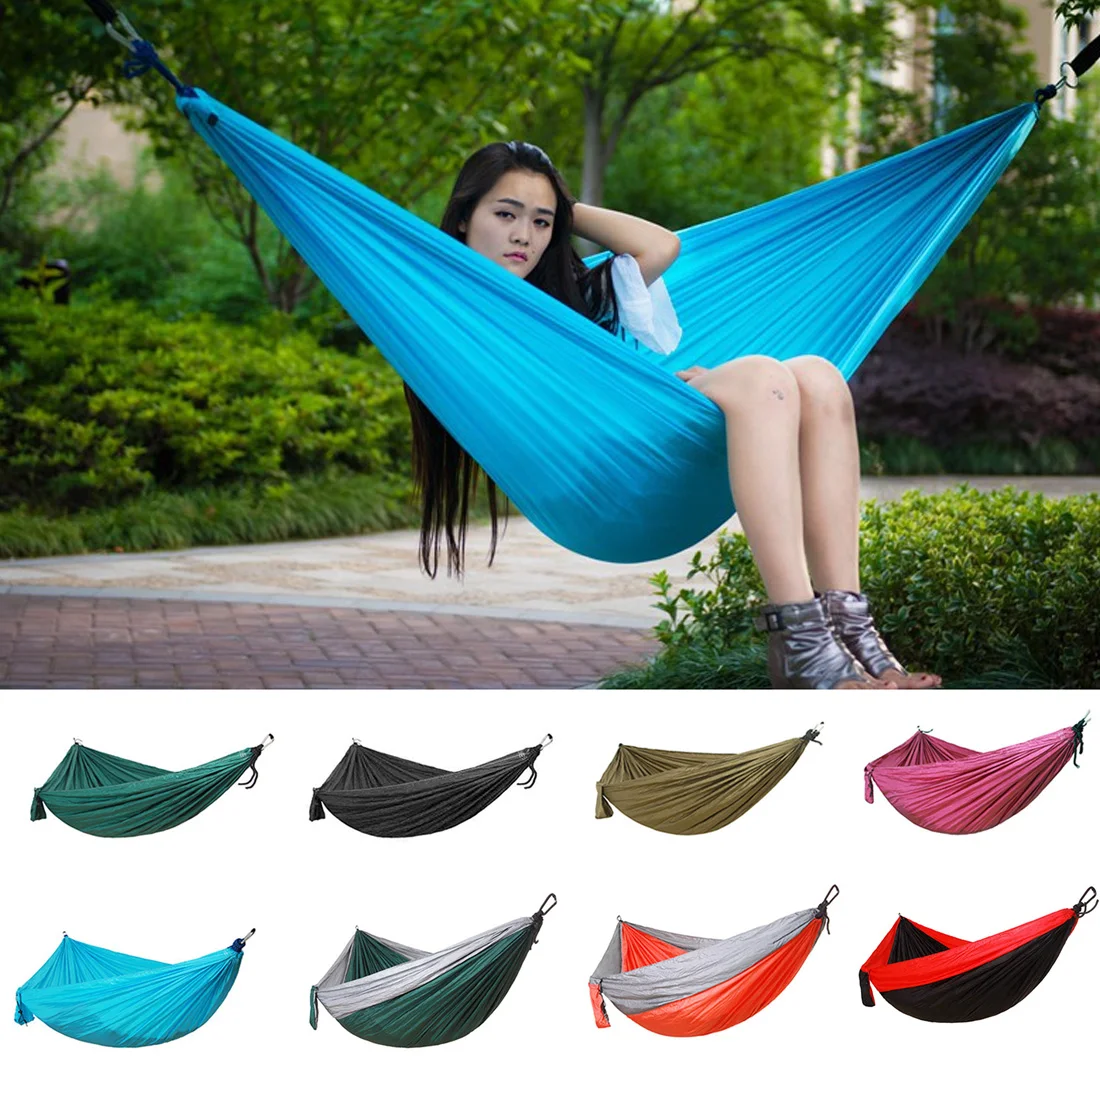 

Single Double Hammock Adult Outdoor Backpacking Travel Survival Hunting Sleeping Bed Portable With 2 Straps 2 Carabiner